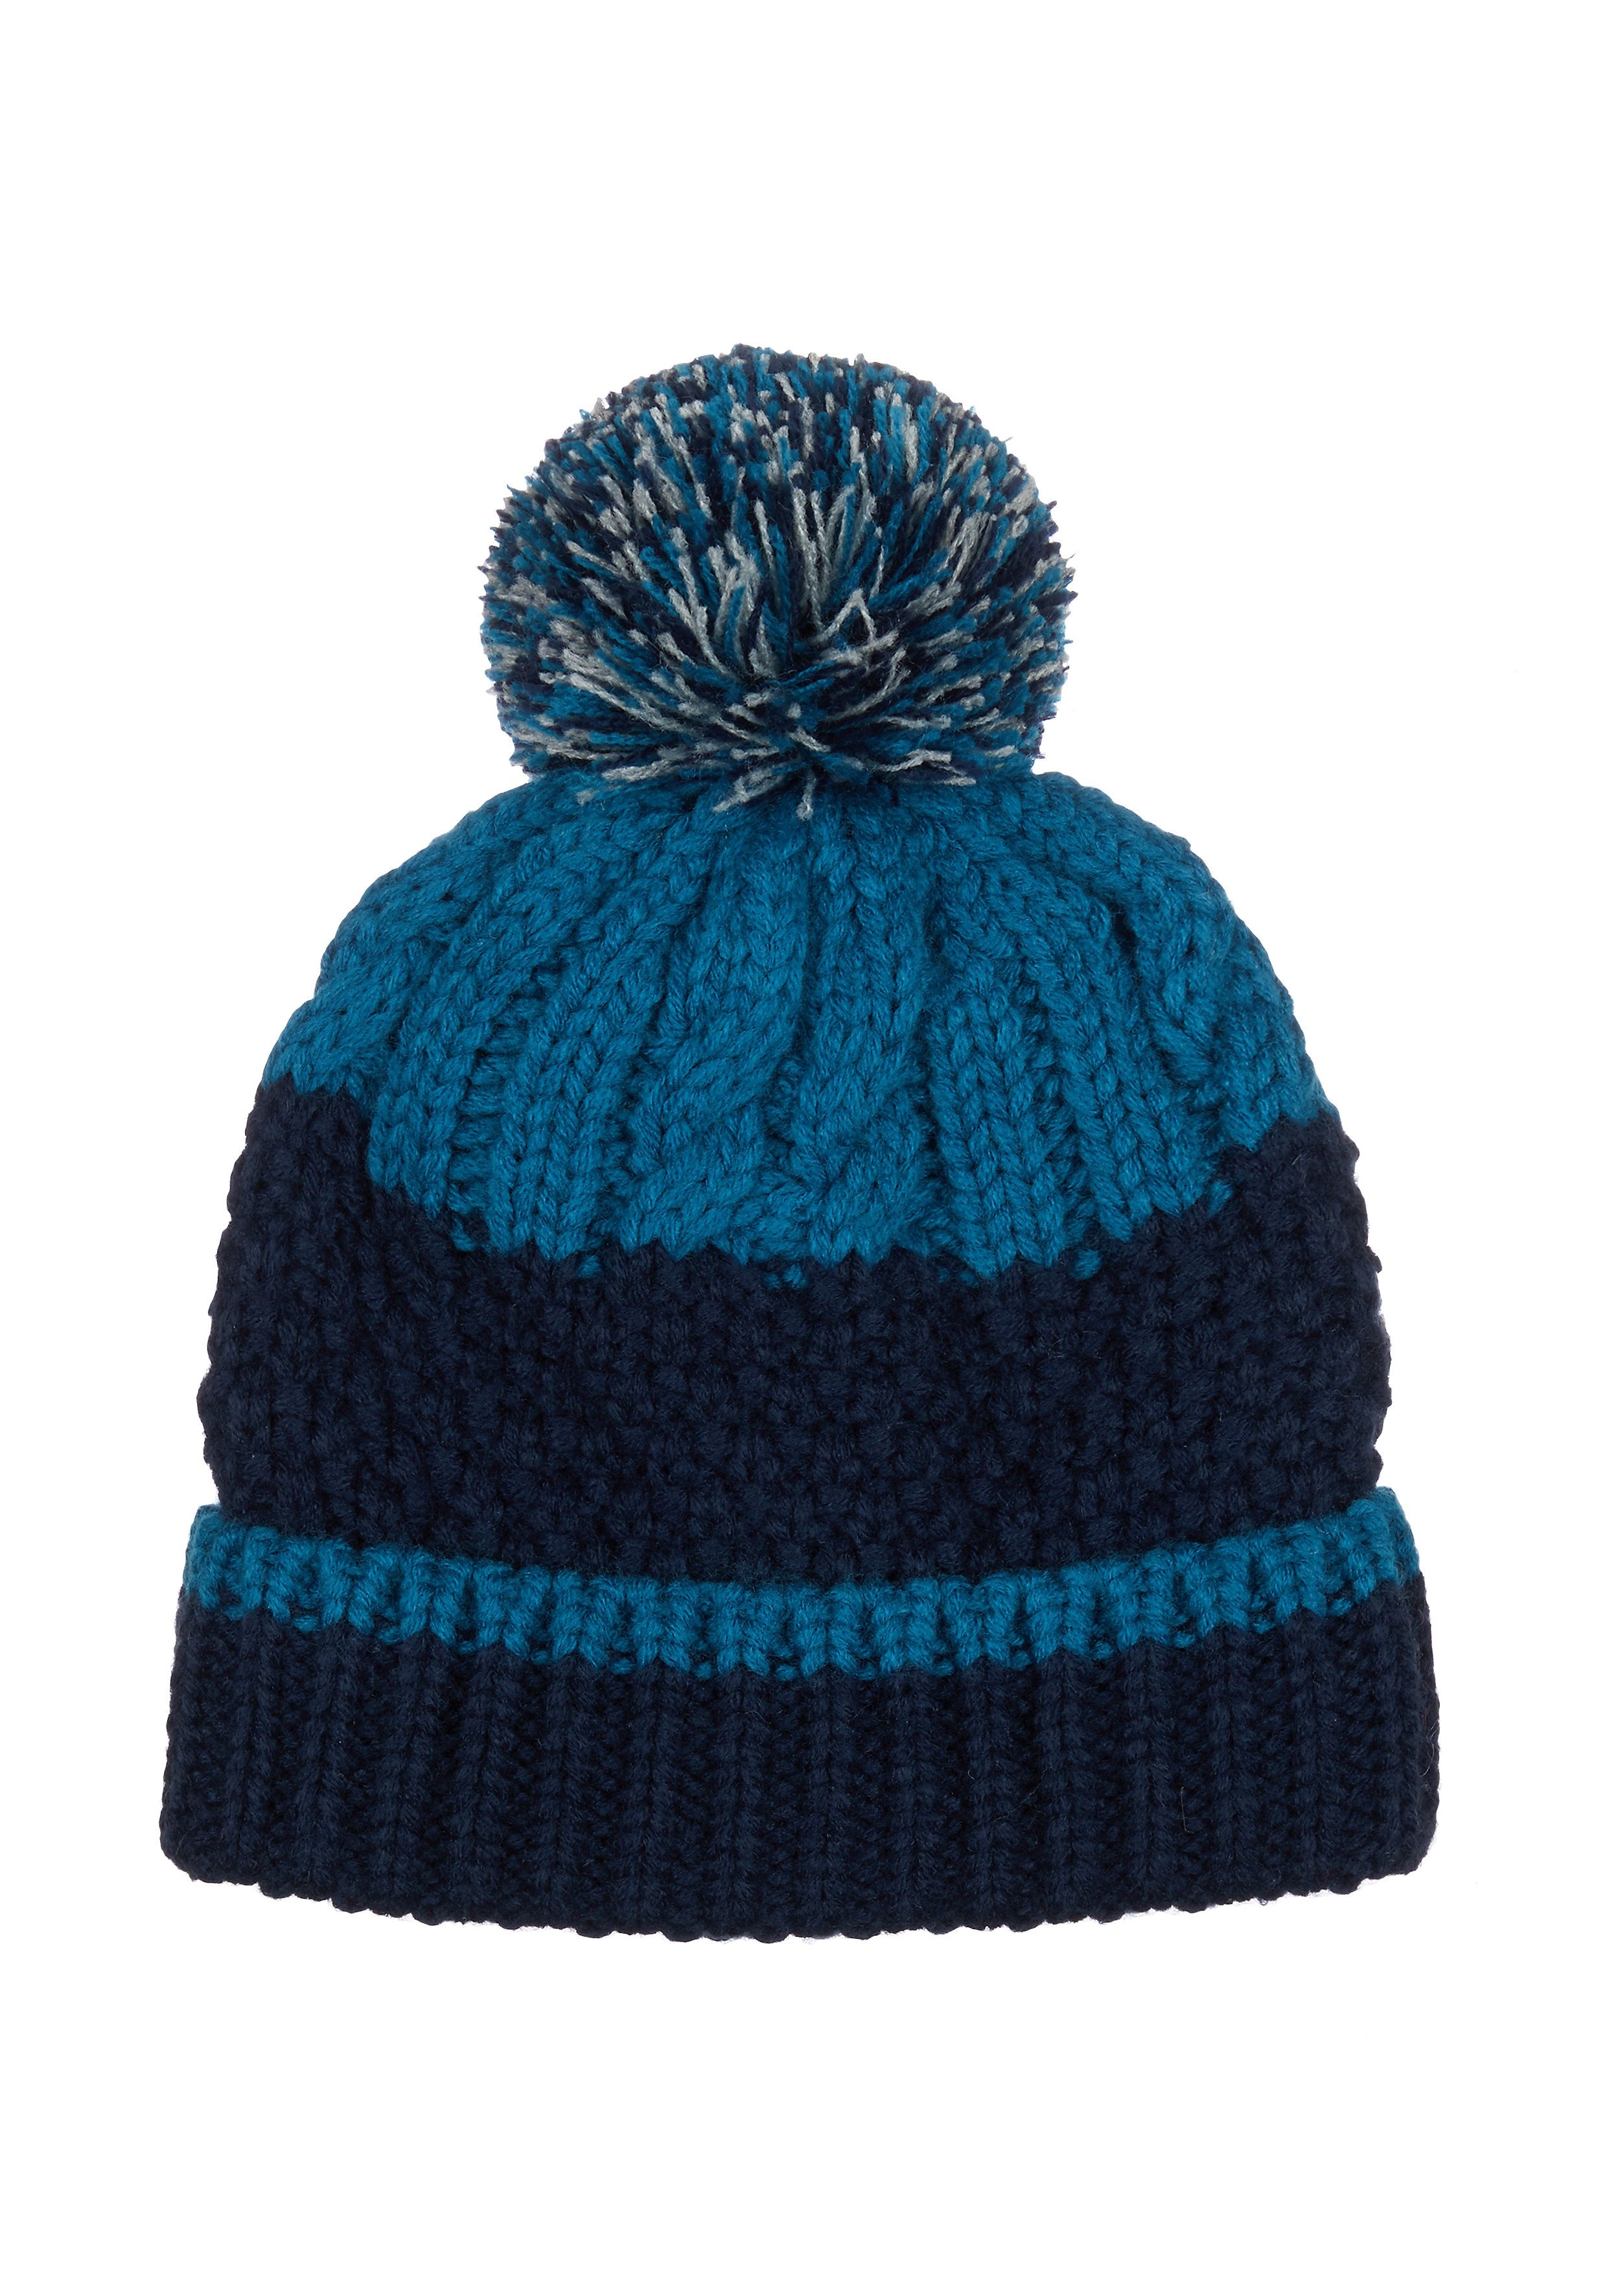 Mothercare | Boys Teal And Navy Cable - Knit Beanie Hat - Teal 1